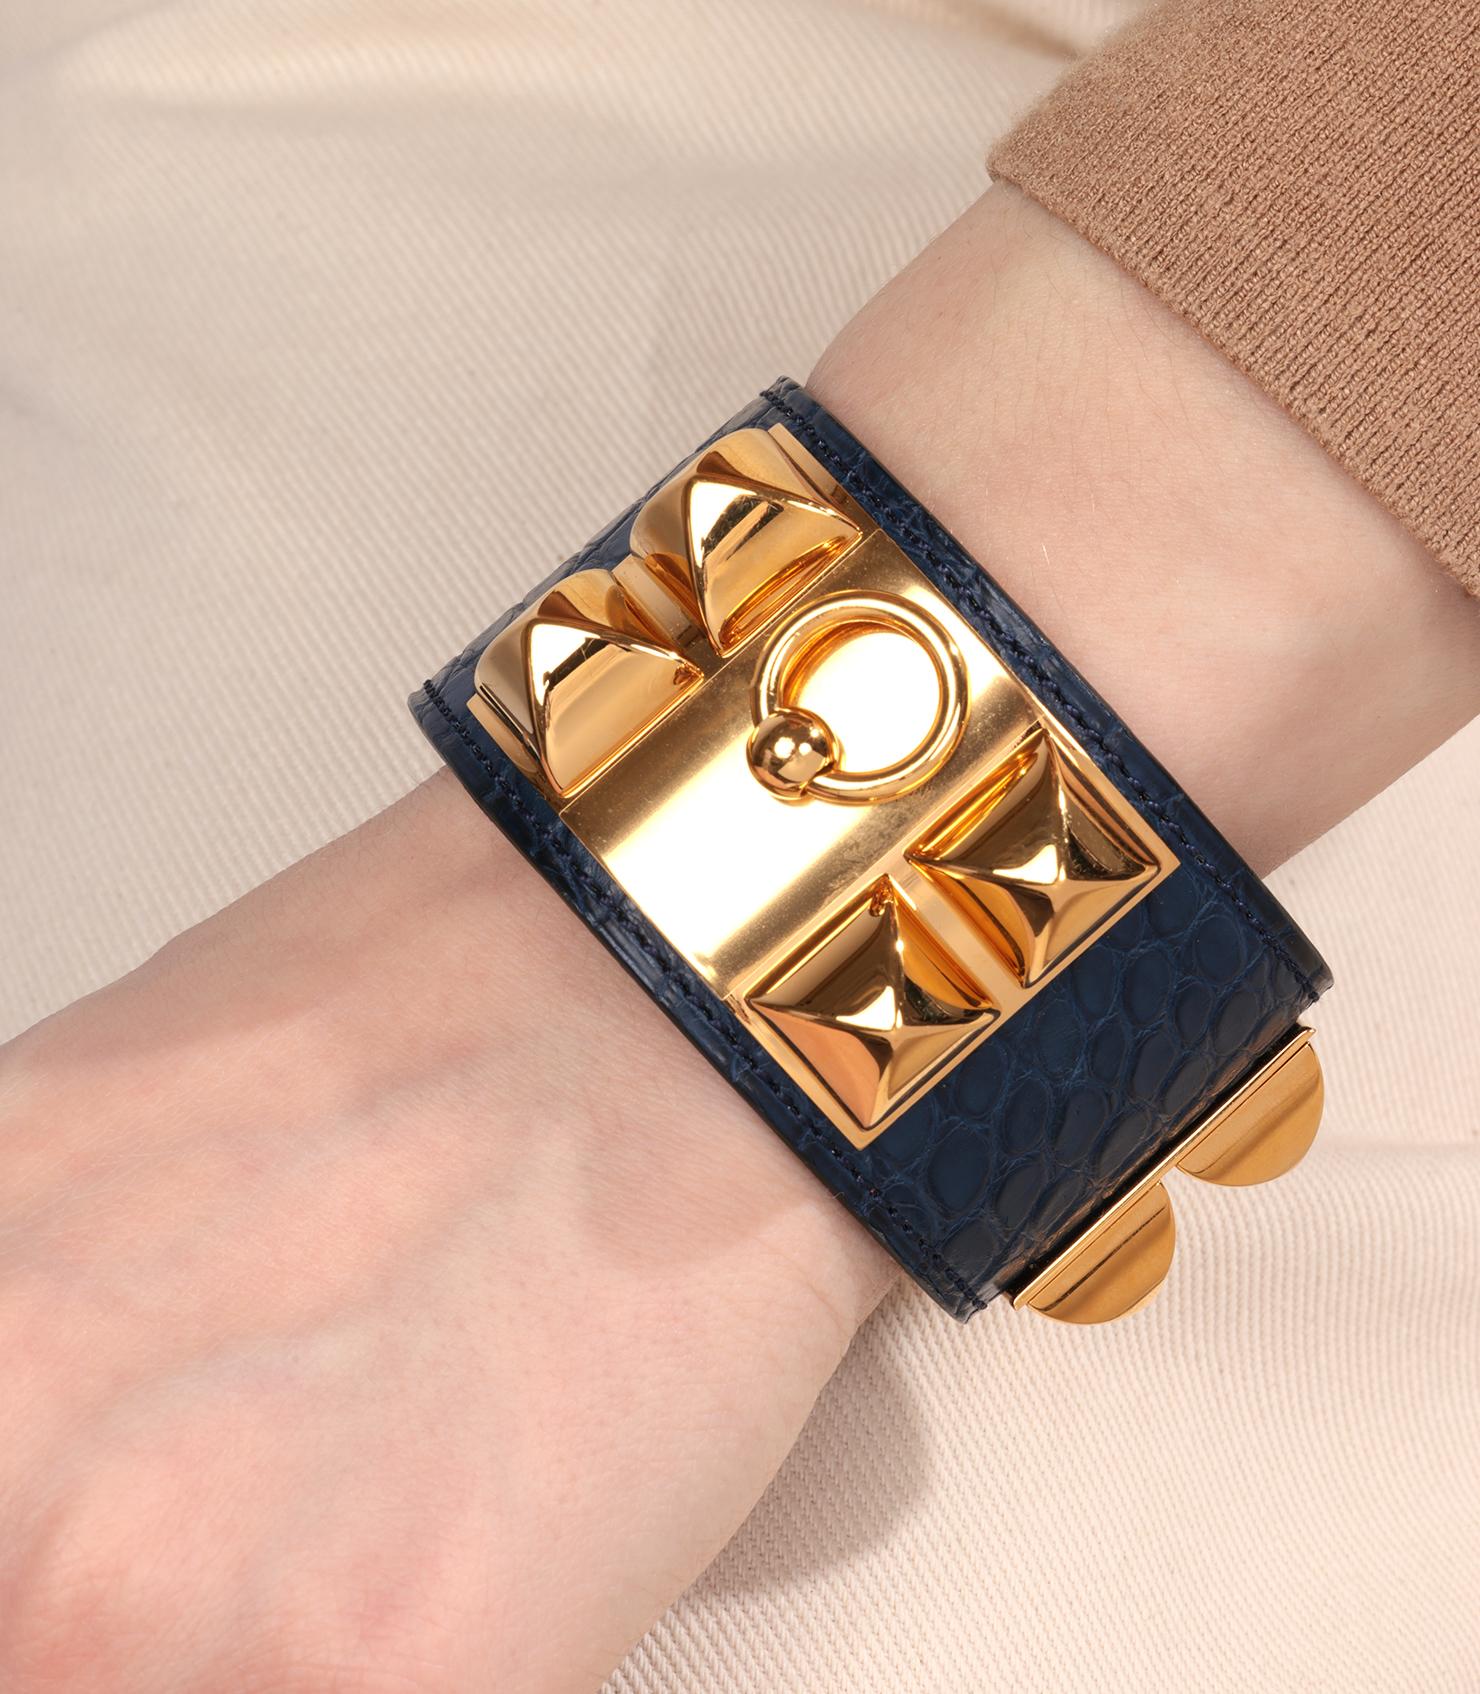 Brand Hermès
Model Collier De Chien
Product Type Bracelet
Serial Number S
Age Circa 2015
Accompanied By Hermès Dust Bag
Material(s) Gold Tone Plated
Bracelet Length 16.5cm
Bracelet Width 40mm
Condition Rating Very Good
Condition Notes An item rated